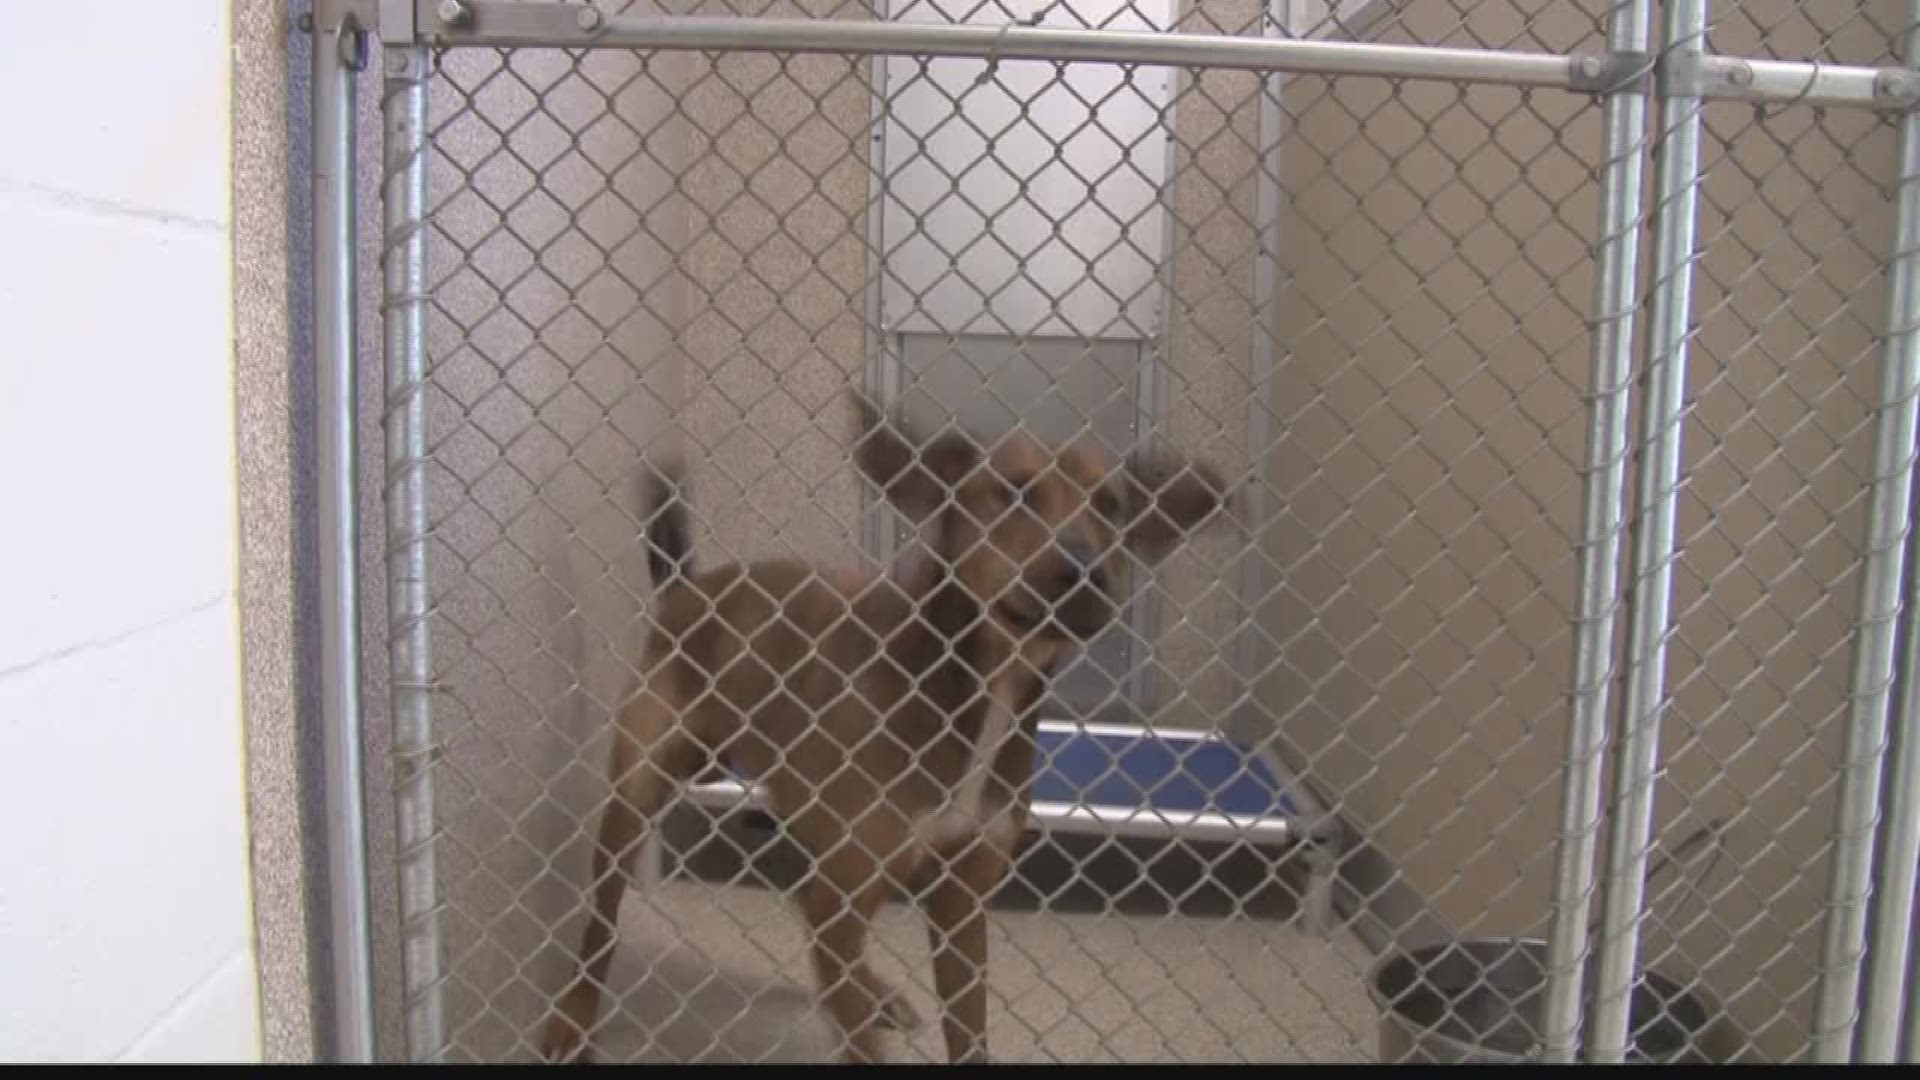 Macon-Bibb Animal Shelter might have to euthanize dogs